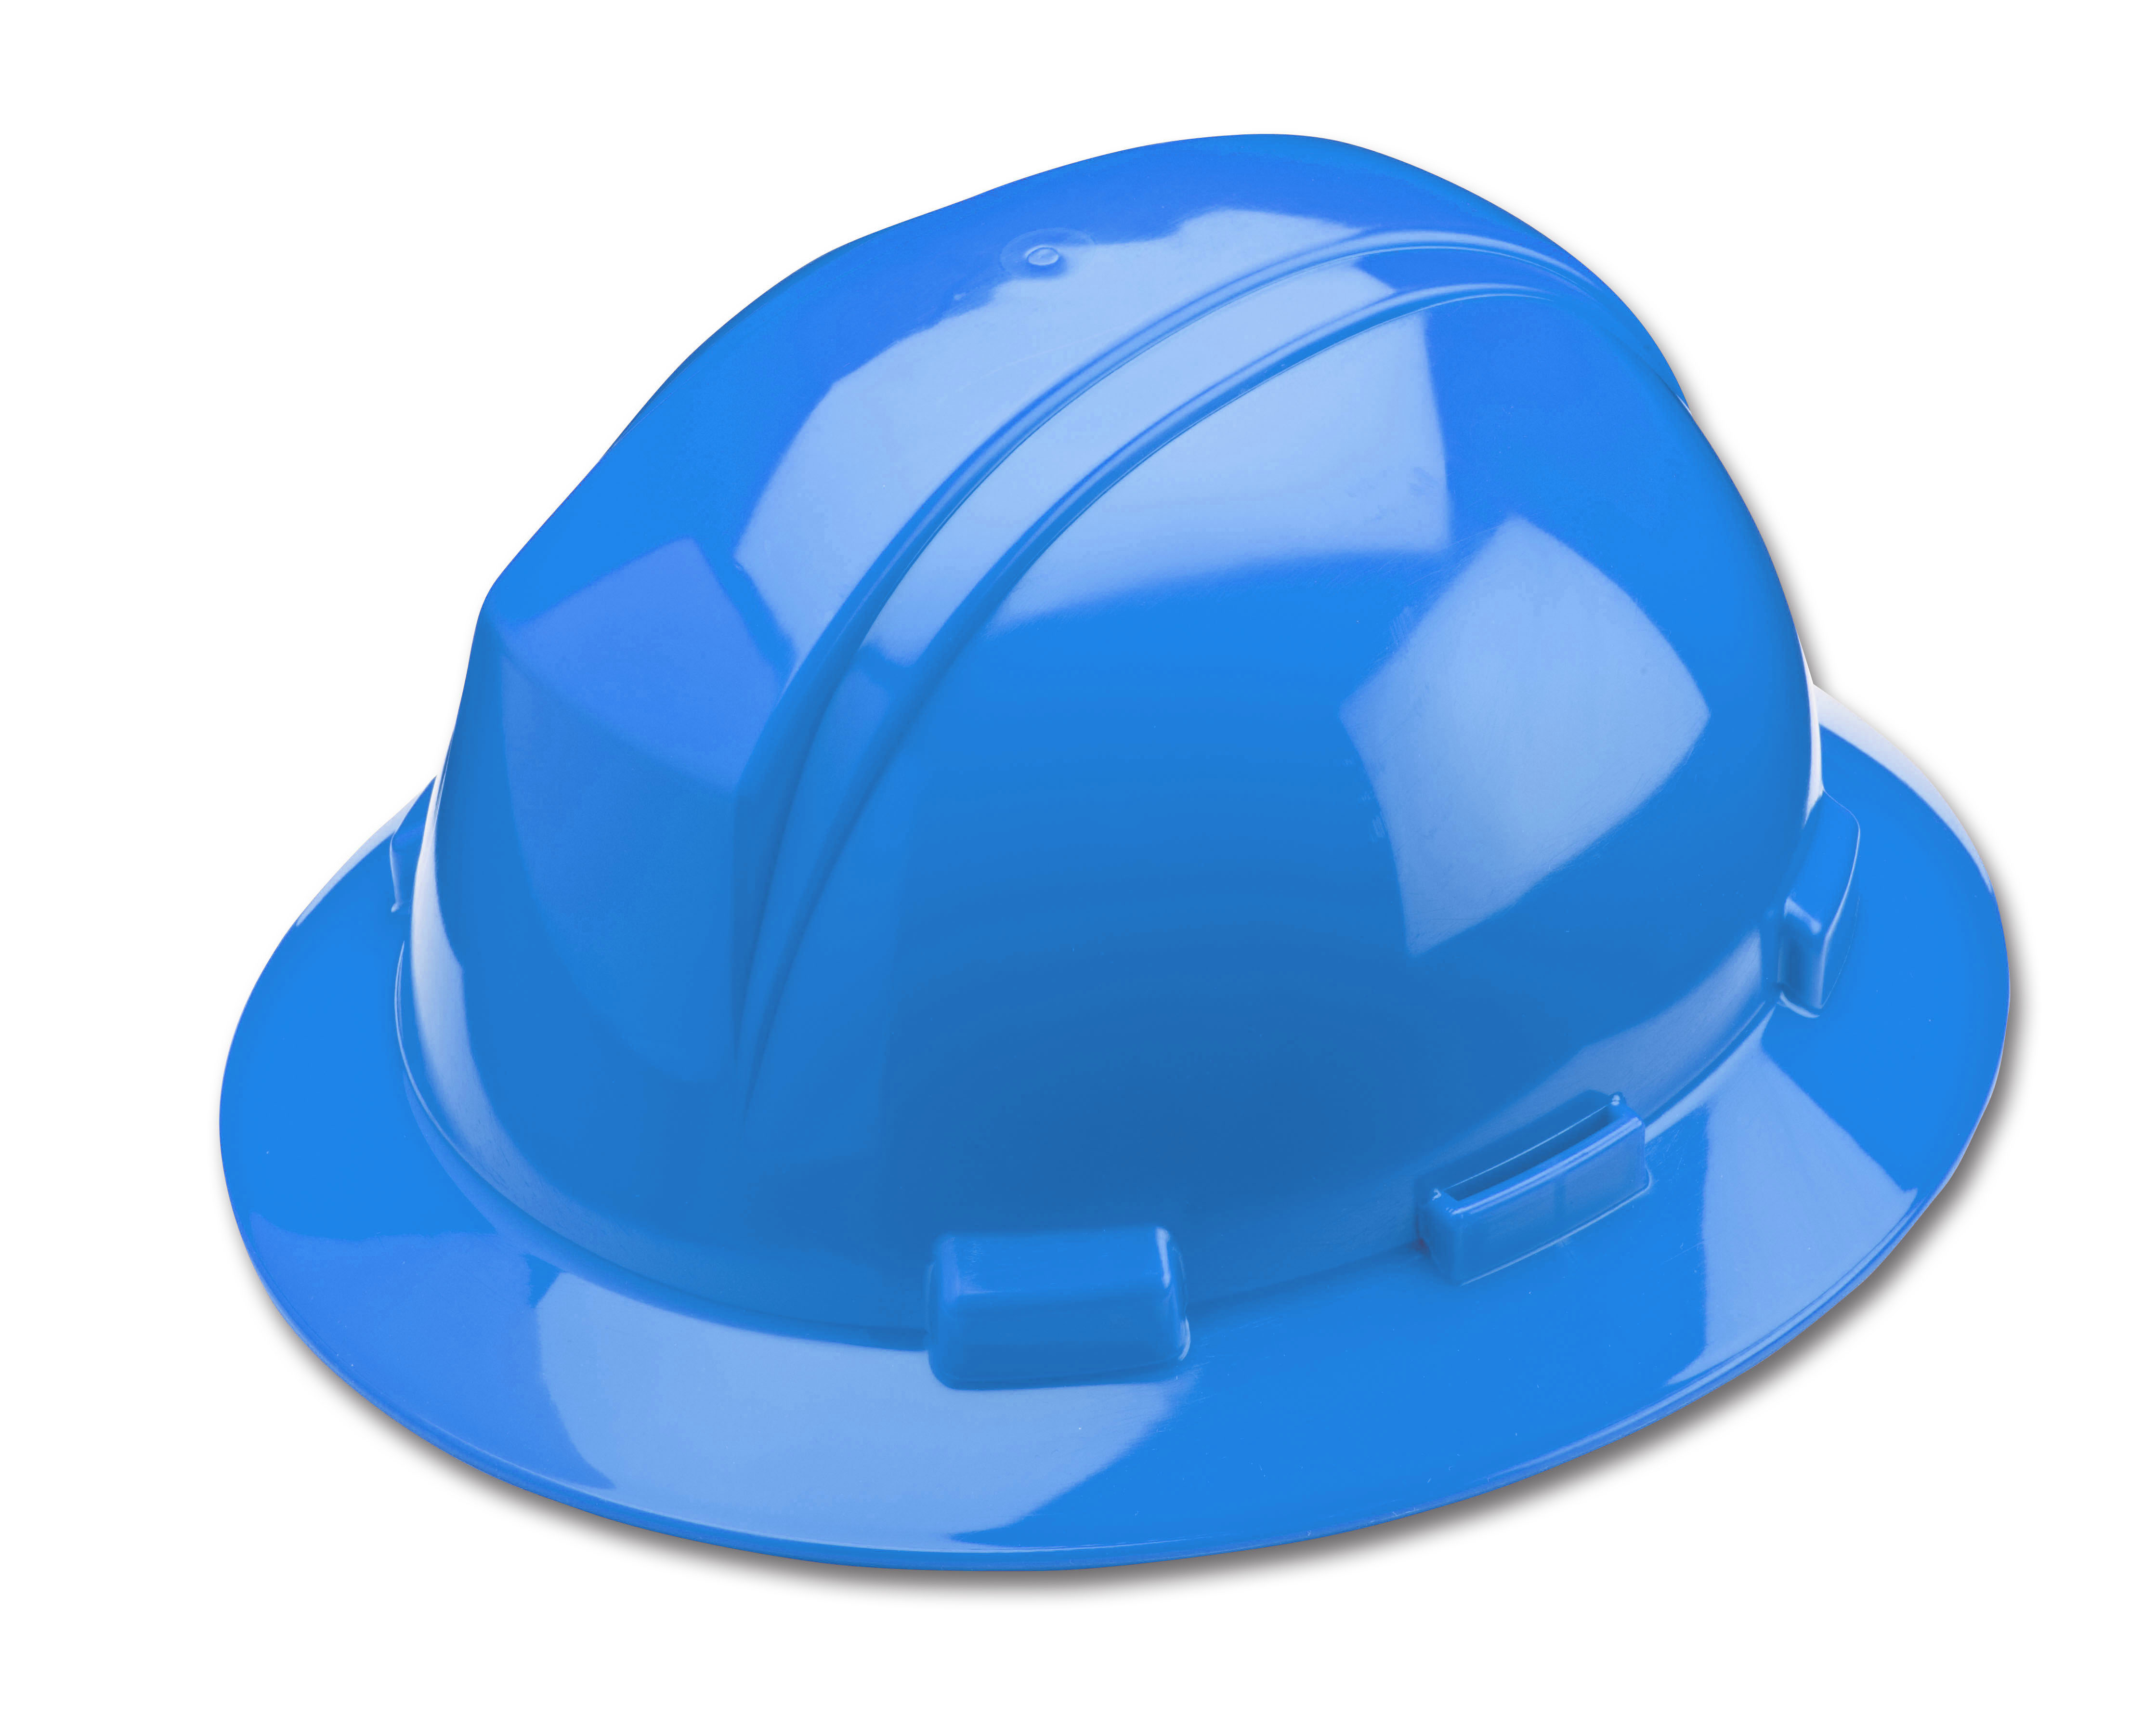 Royal Blue Dynamic Safety HP642R/17 Kilimanjaro Hard Hat with 4-Point Nylon Suspension and Sure-Lock Ratchet Adjustment ANSI Type II One Size 